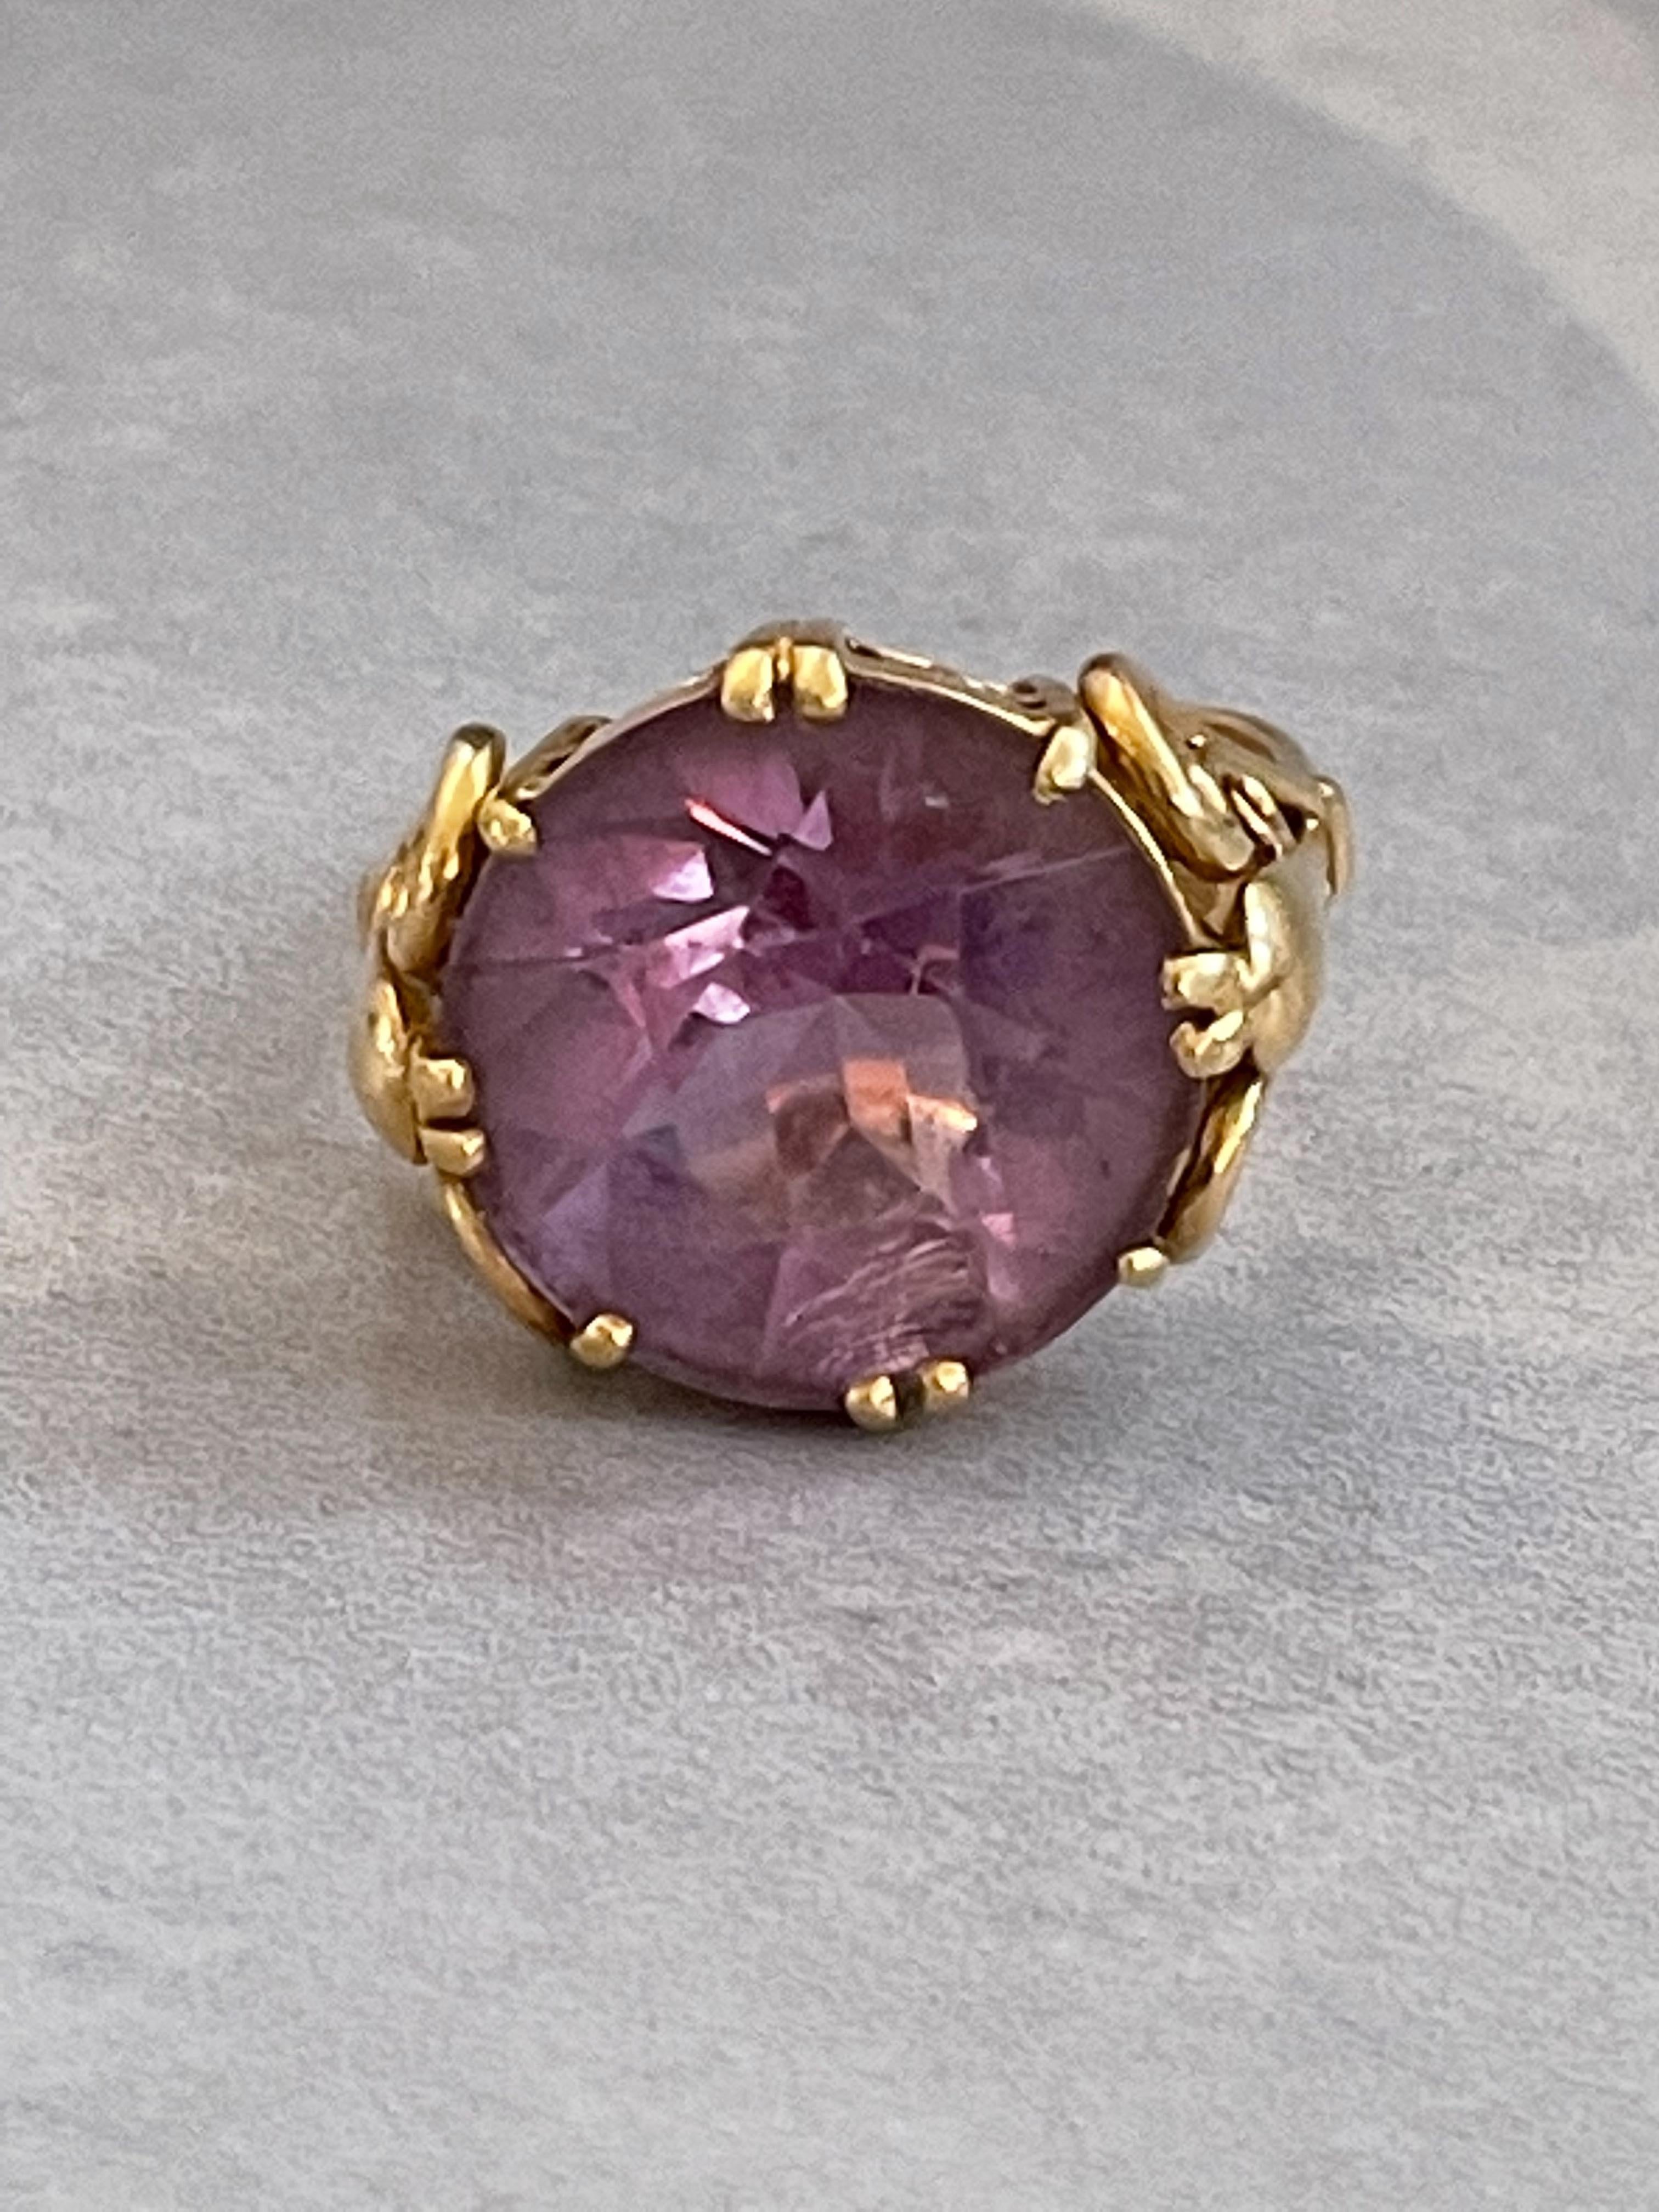 The setting is as beautiful as the stone in this vintage ring.  It's handmade and one-of-a-kind which his the beauty of vintage jewelry.  No one else has a ring like this one!

This ring features a round, faceted Amethyst.  The diameter of the stone